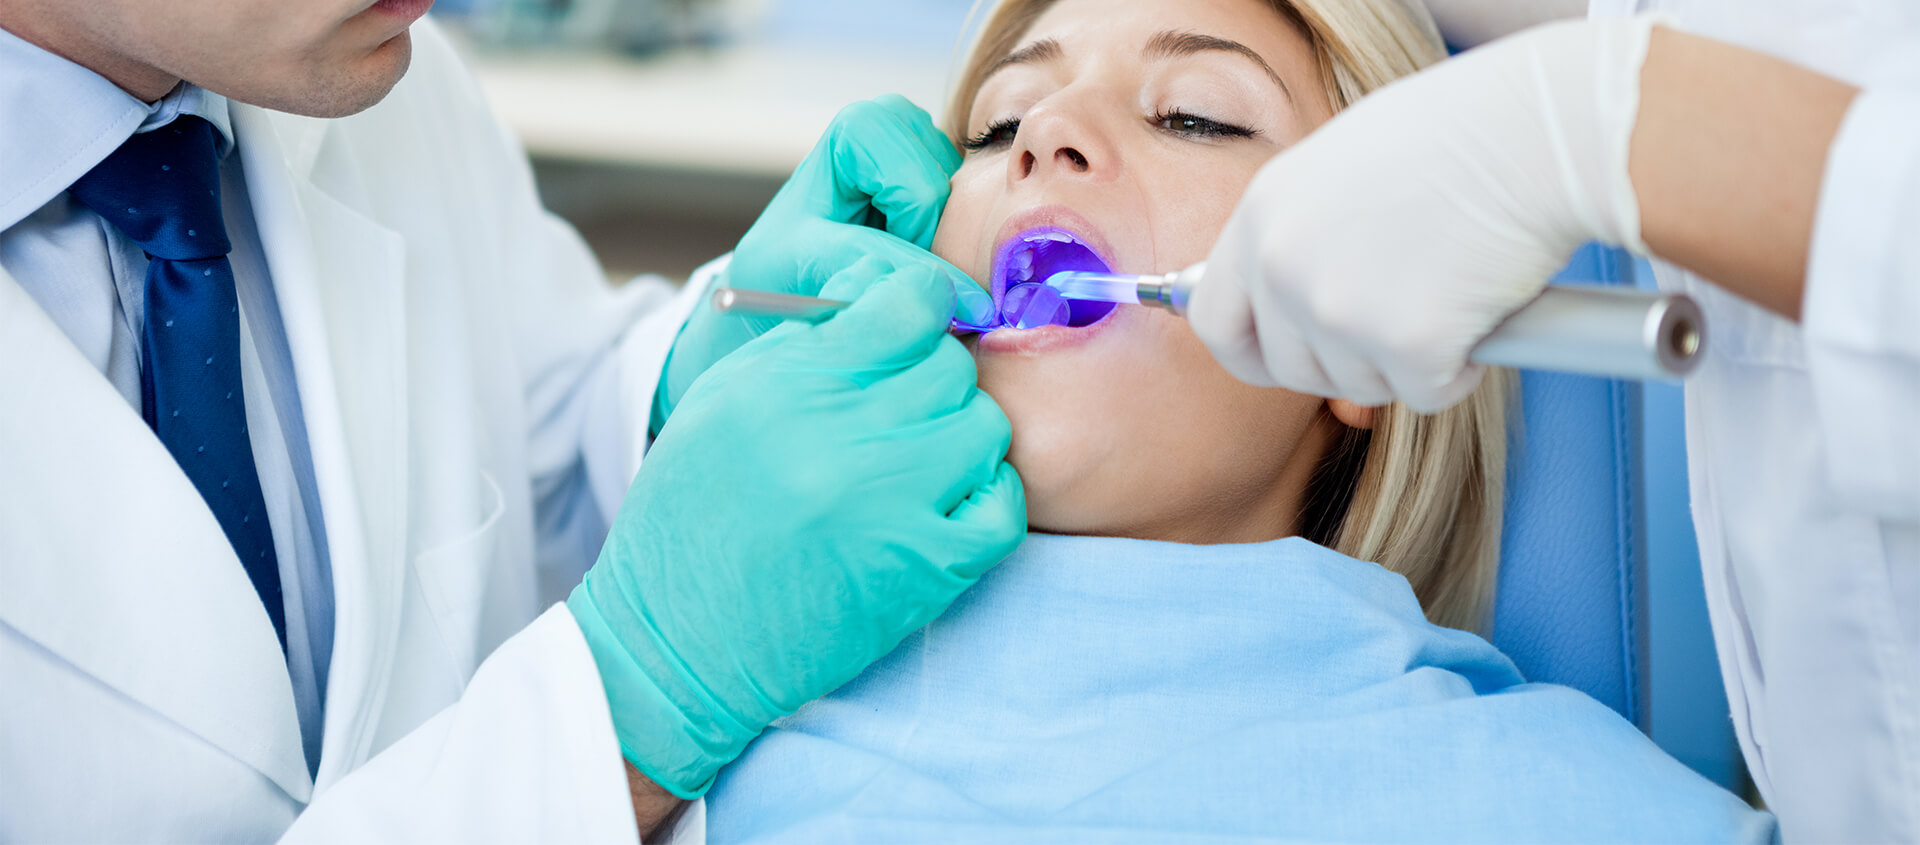 Laser Treatment for Gum Disease in Middletown Indiana Area